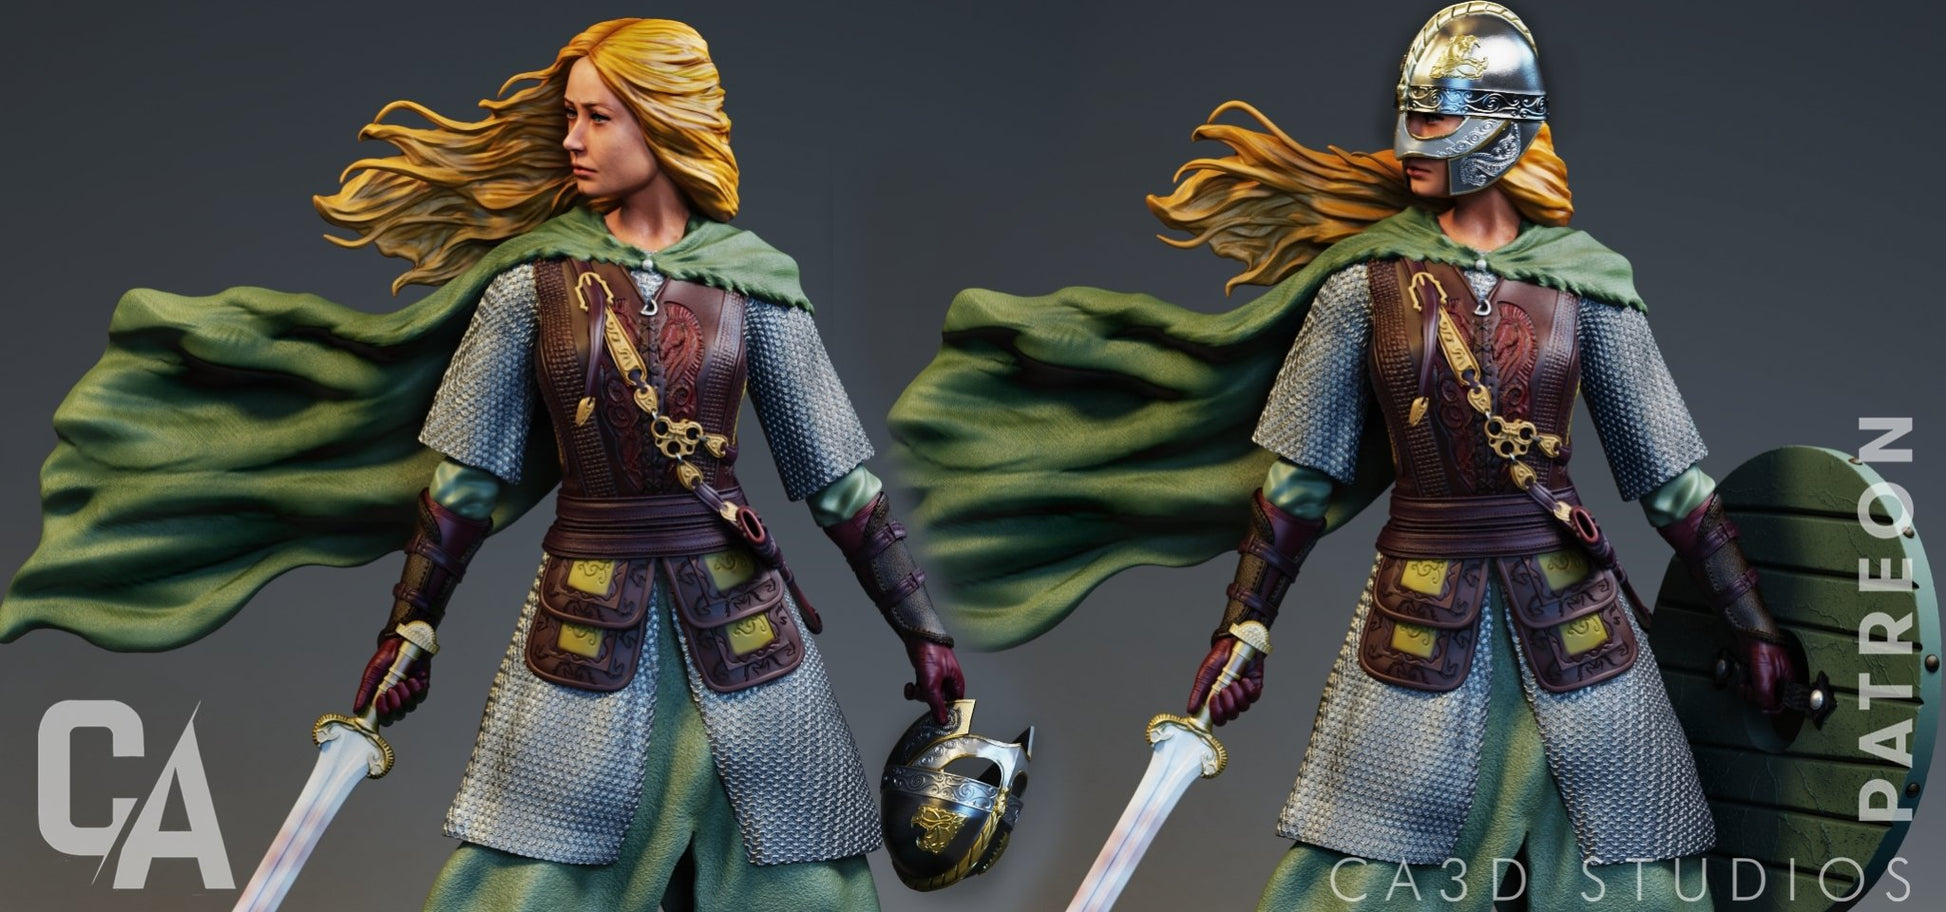 Éowyn 3D Printed Miniature FunArt Statues & Figurines & Collectible Unpainted by ca_3d_art